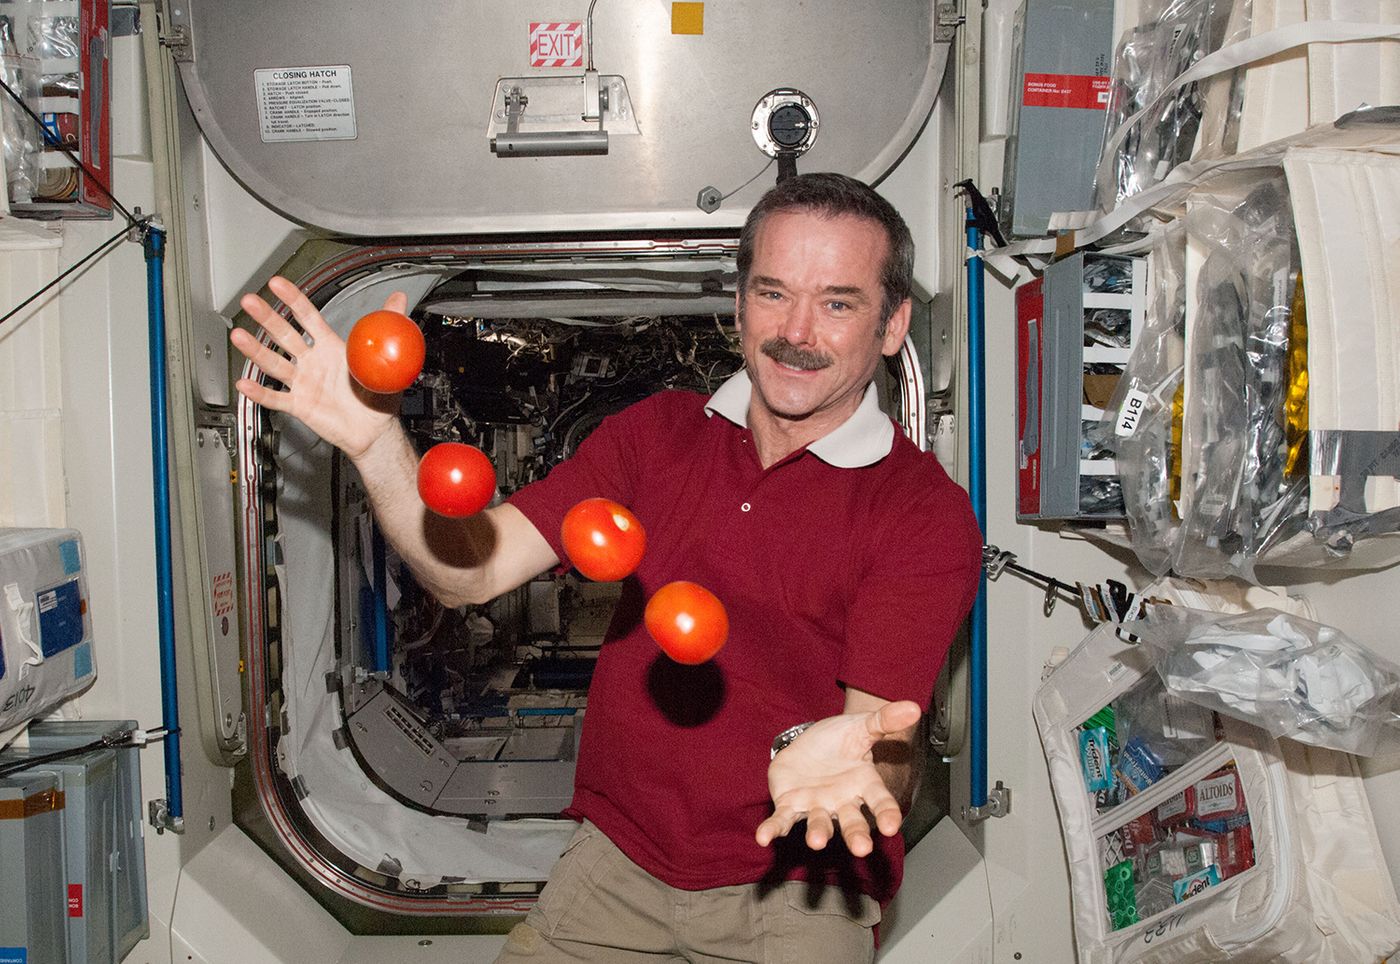 Canadian Space Agency Astronaut, Chris Hadfield, onboard the International Space Station during Expedition 34. (Credit: NASA)